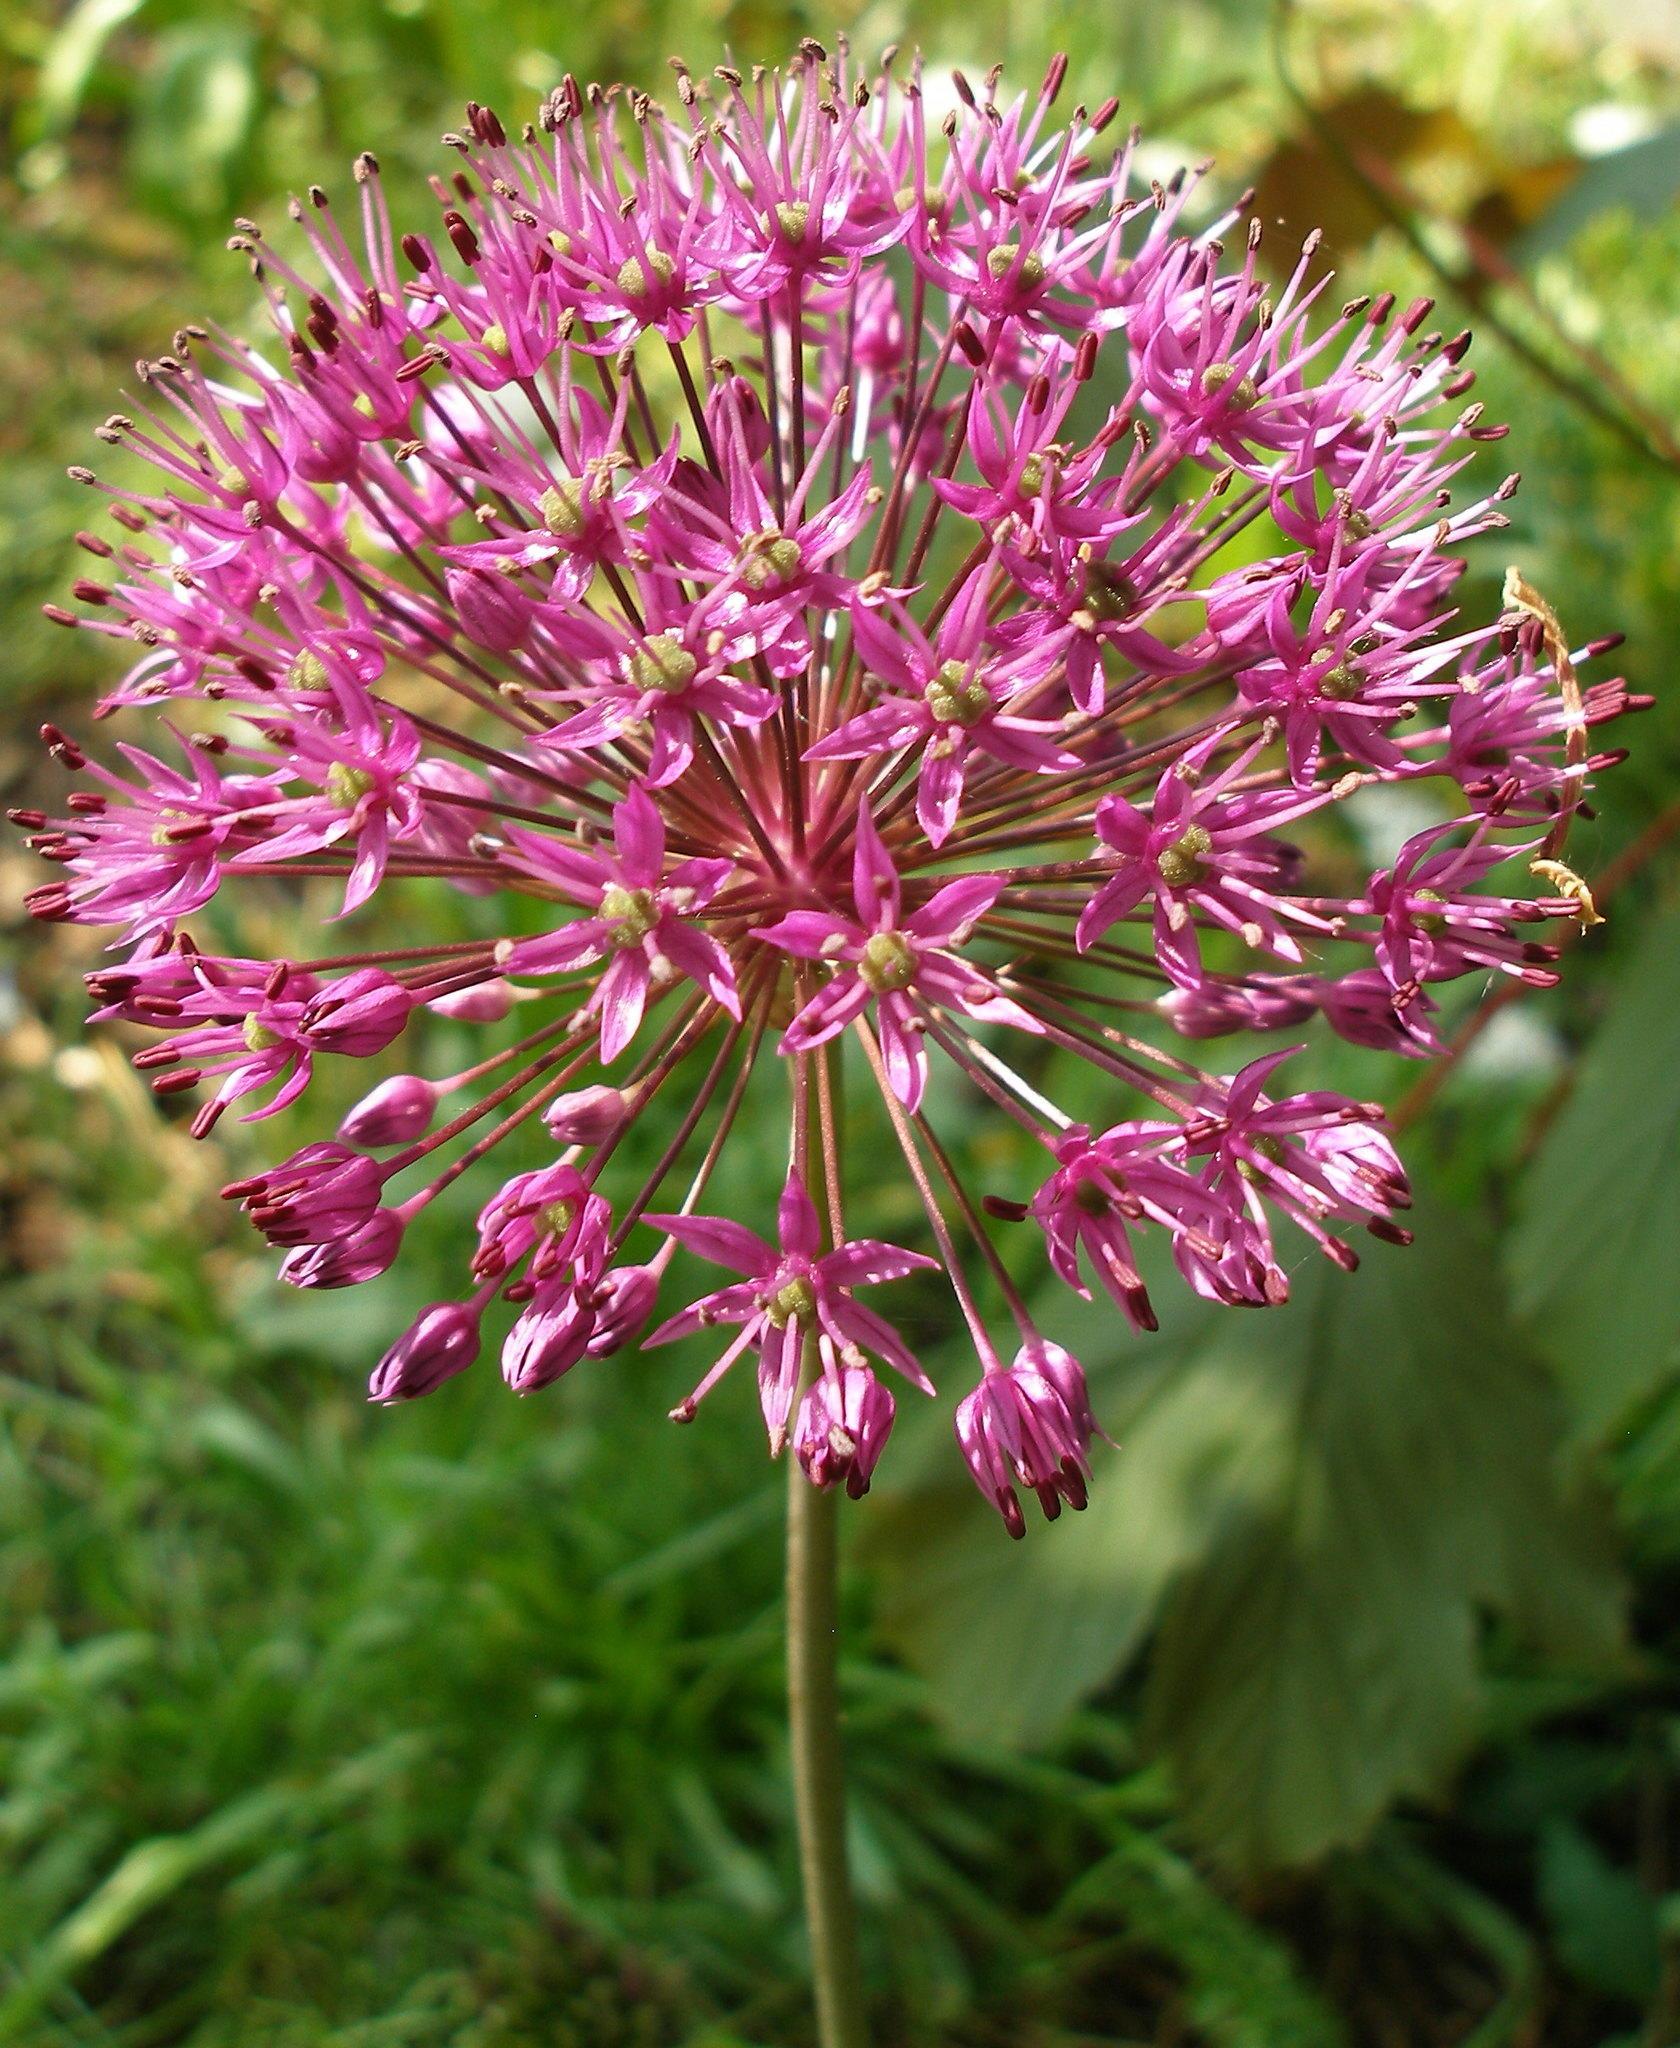 Many small pink flowers arranged in shape of large globe